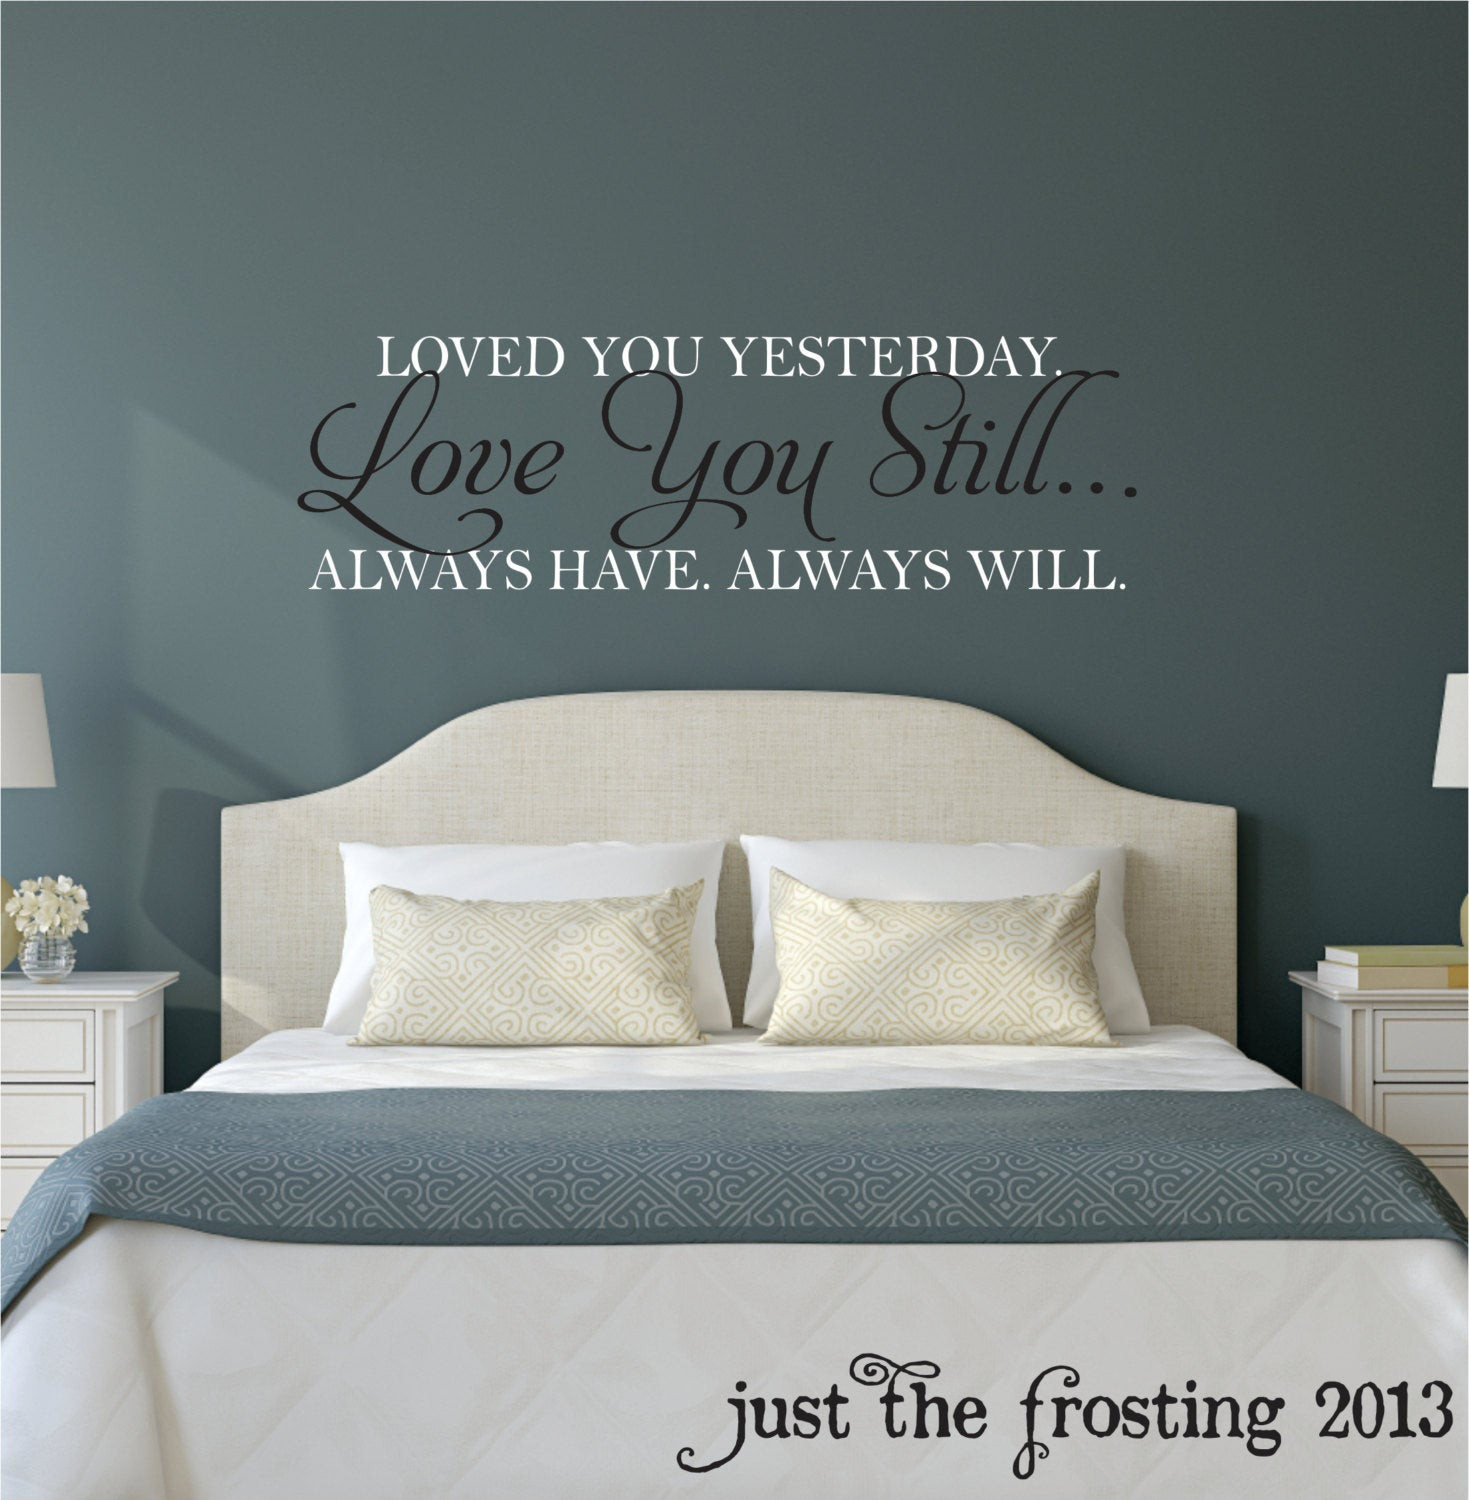 Wall Decal Quotes For Bedroom
 Love You Still Master Bedroom Wall Decal Vinyl Wall Quote